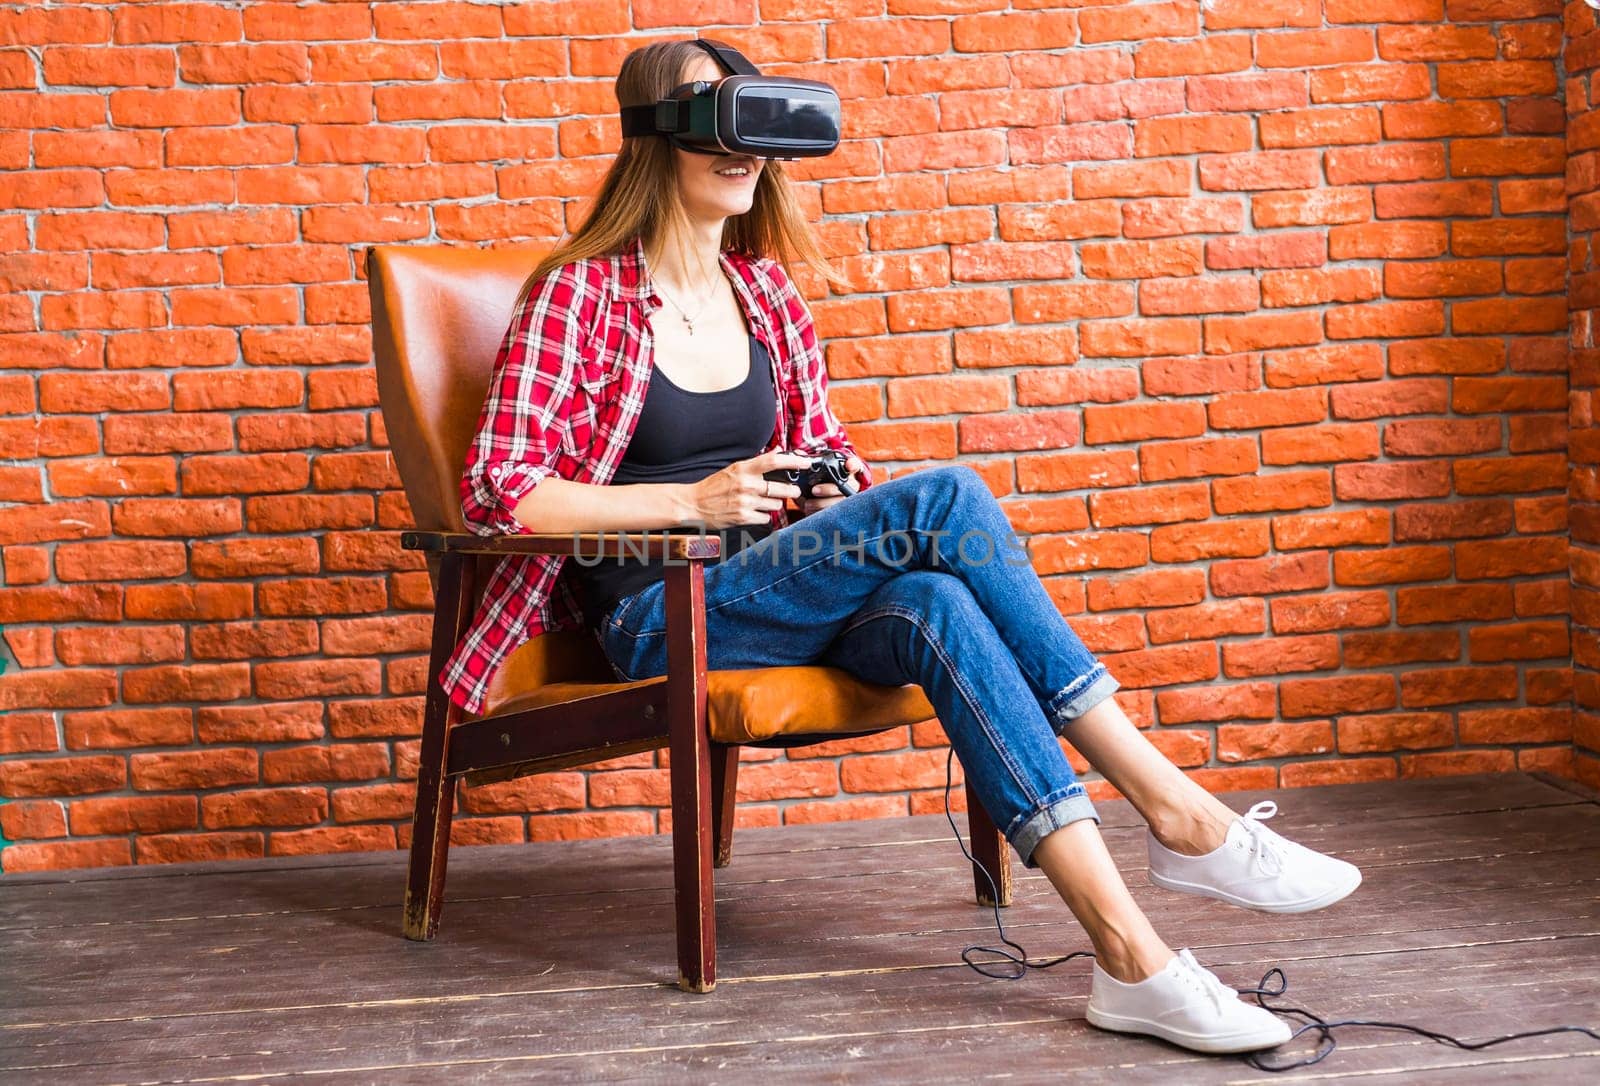 Woman play video game with joystick with VR device.